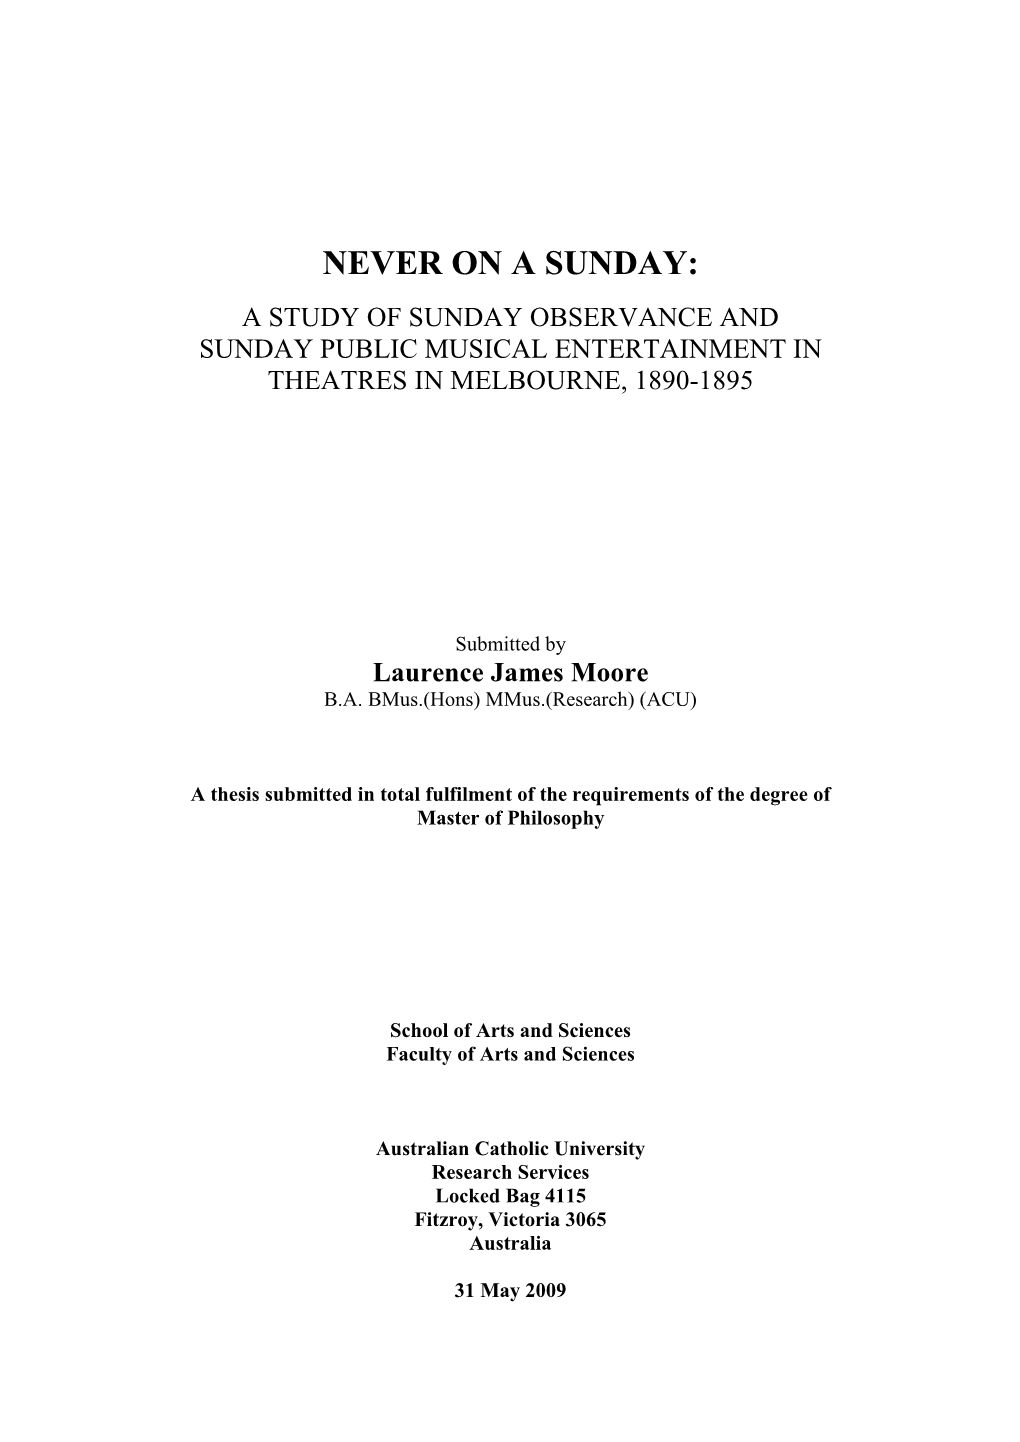 Never on a Sunday: a Study of Sunday Observance and Sunday Public Musical Entertainment in Theatres in Melbourne, 1890-1895